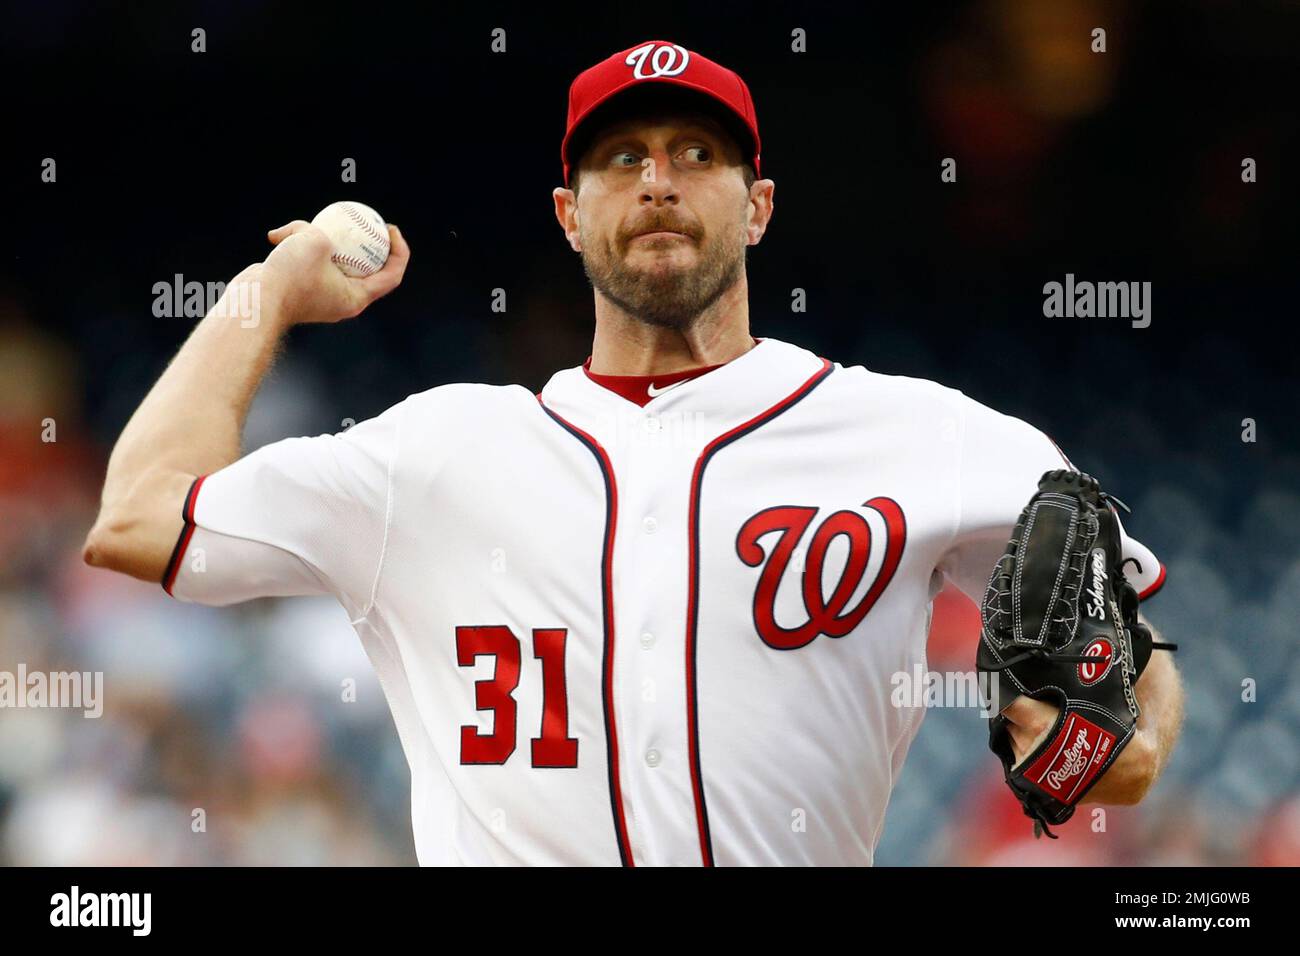 Washington Nationals starting pitcher Max Scherzer delivers a pitch during  a baseball game against the Kansas City Royals, Saturday, July 6, 2019, in  Washington. The Nationals are paying tribute to the Montreal